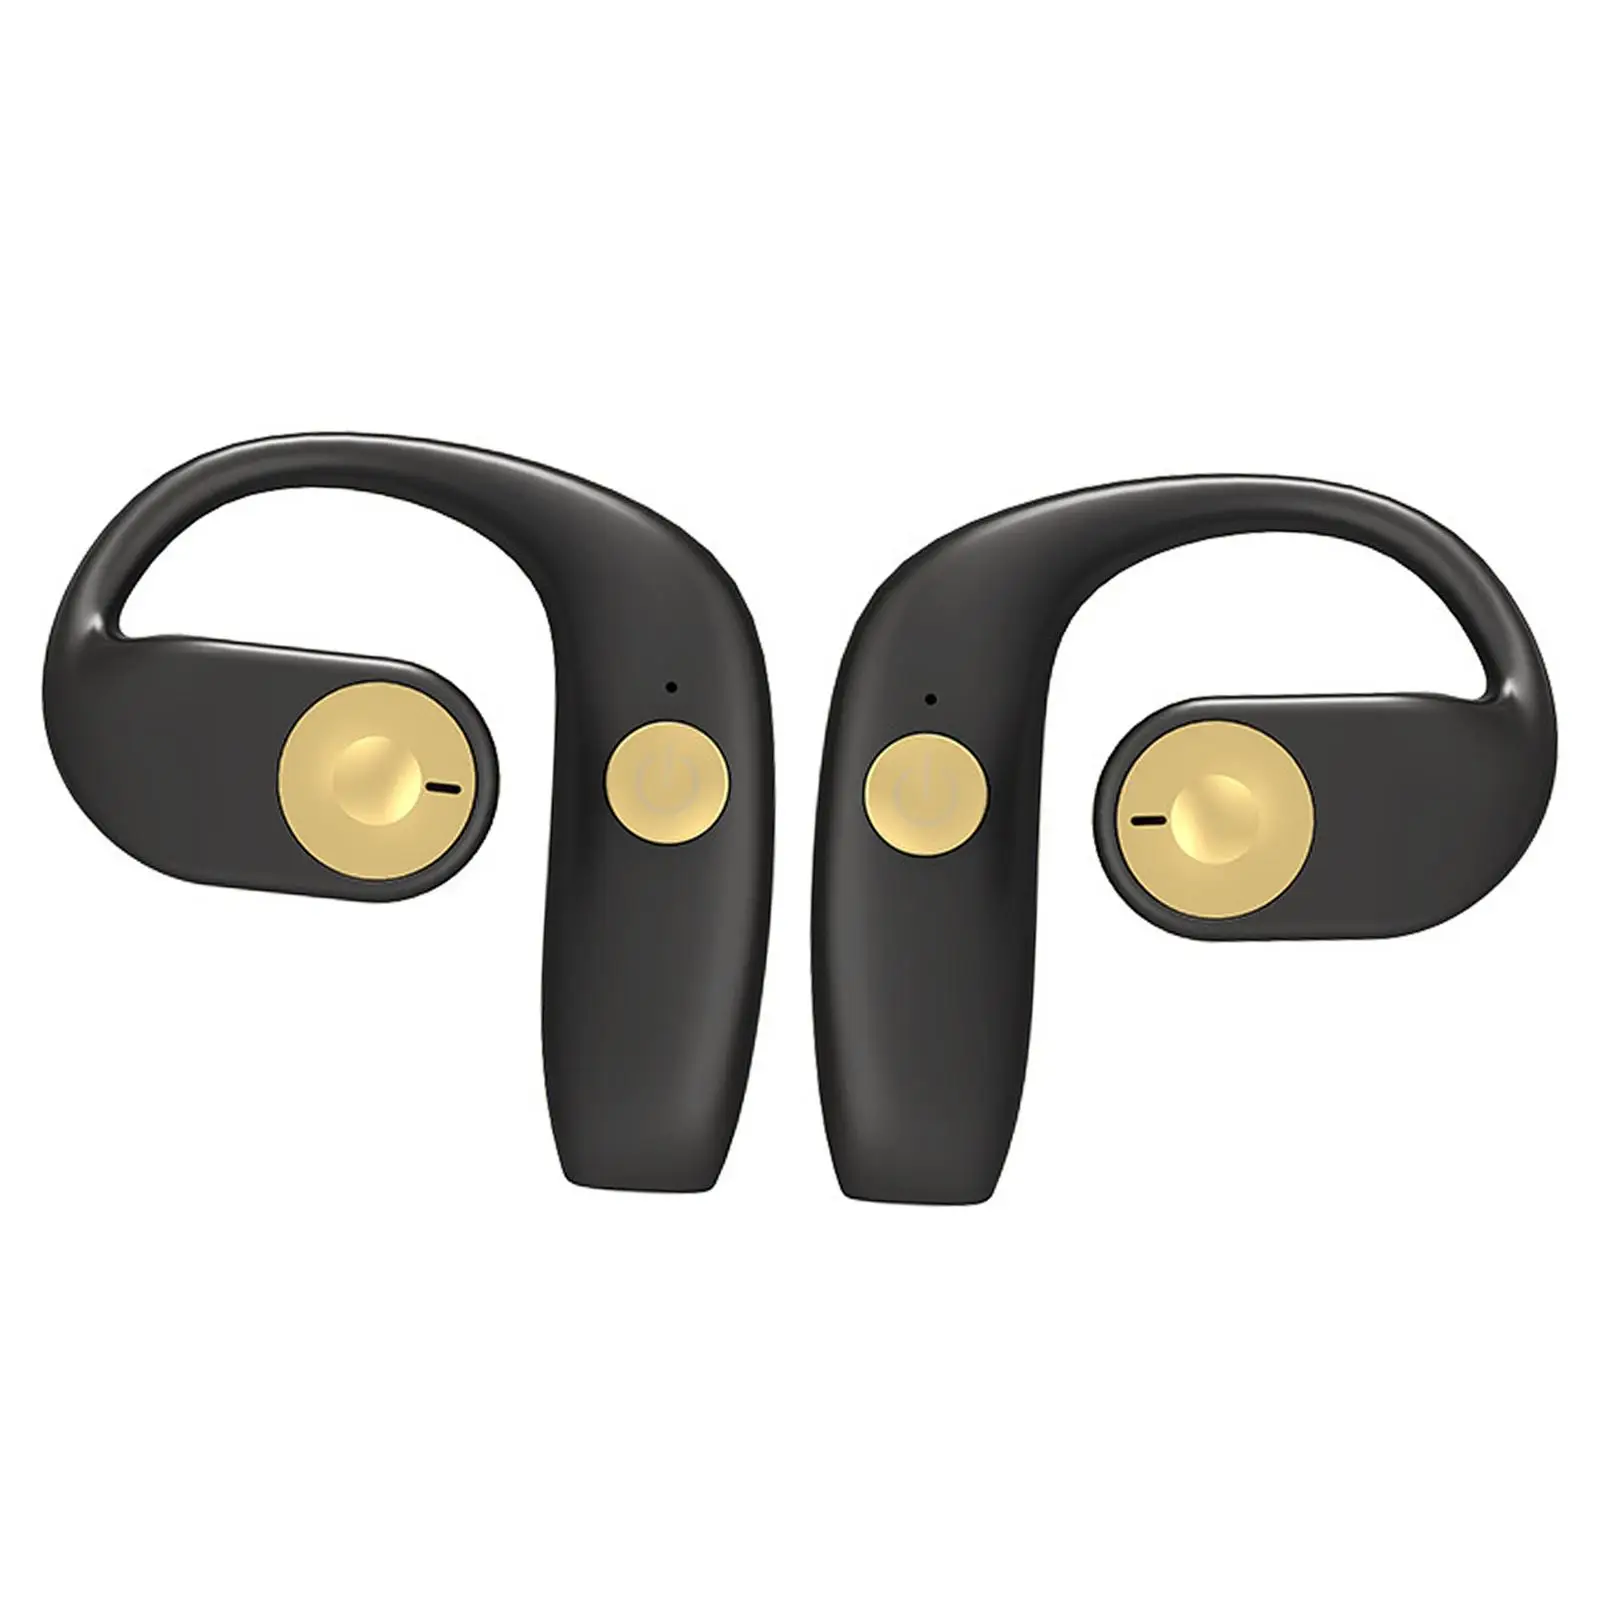 Wireless Headset Earhook HiFi Sound Hands Free Long Standby Time V5.2 Earphones Earbuds for Running Workout Business Gym Office